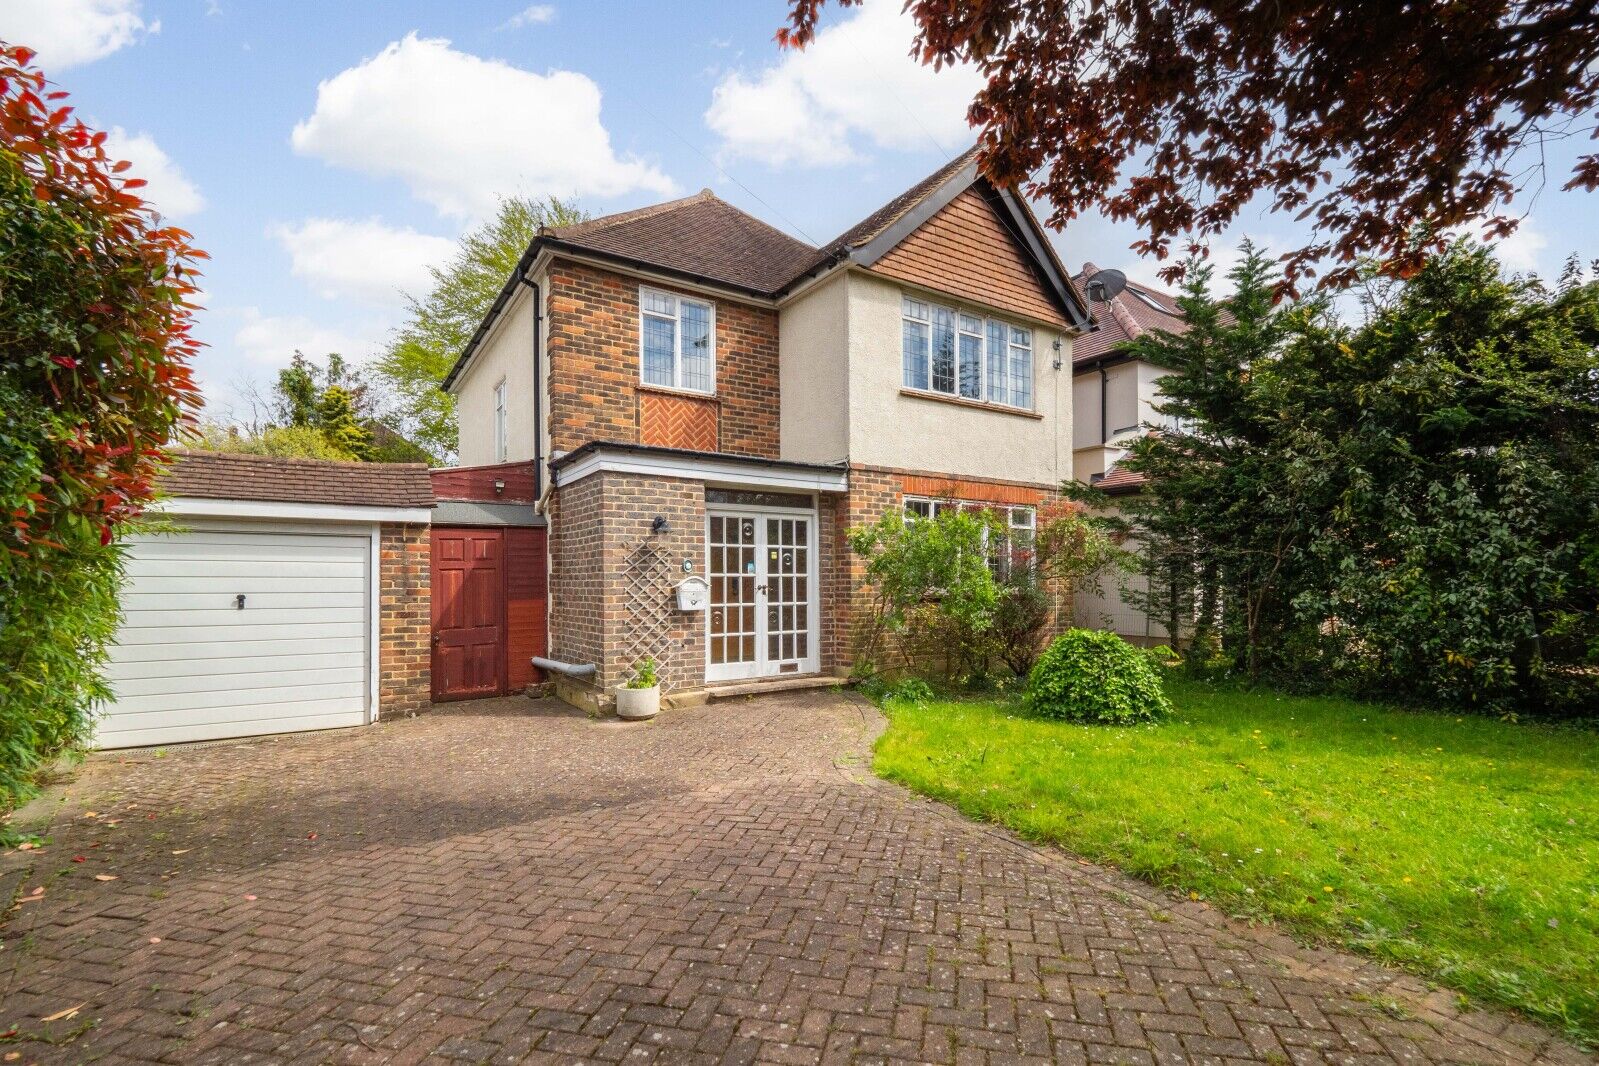 3 bedroom detached house for sale The Dene, Cheam, SM2, main image